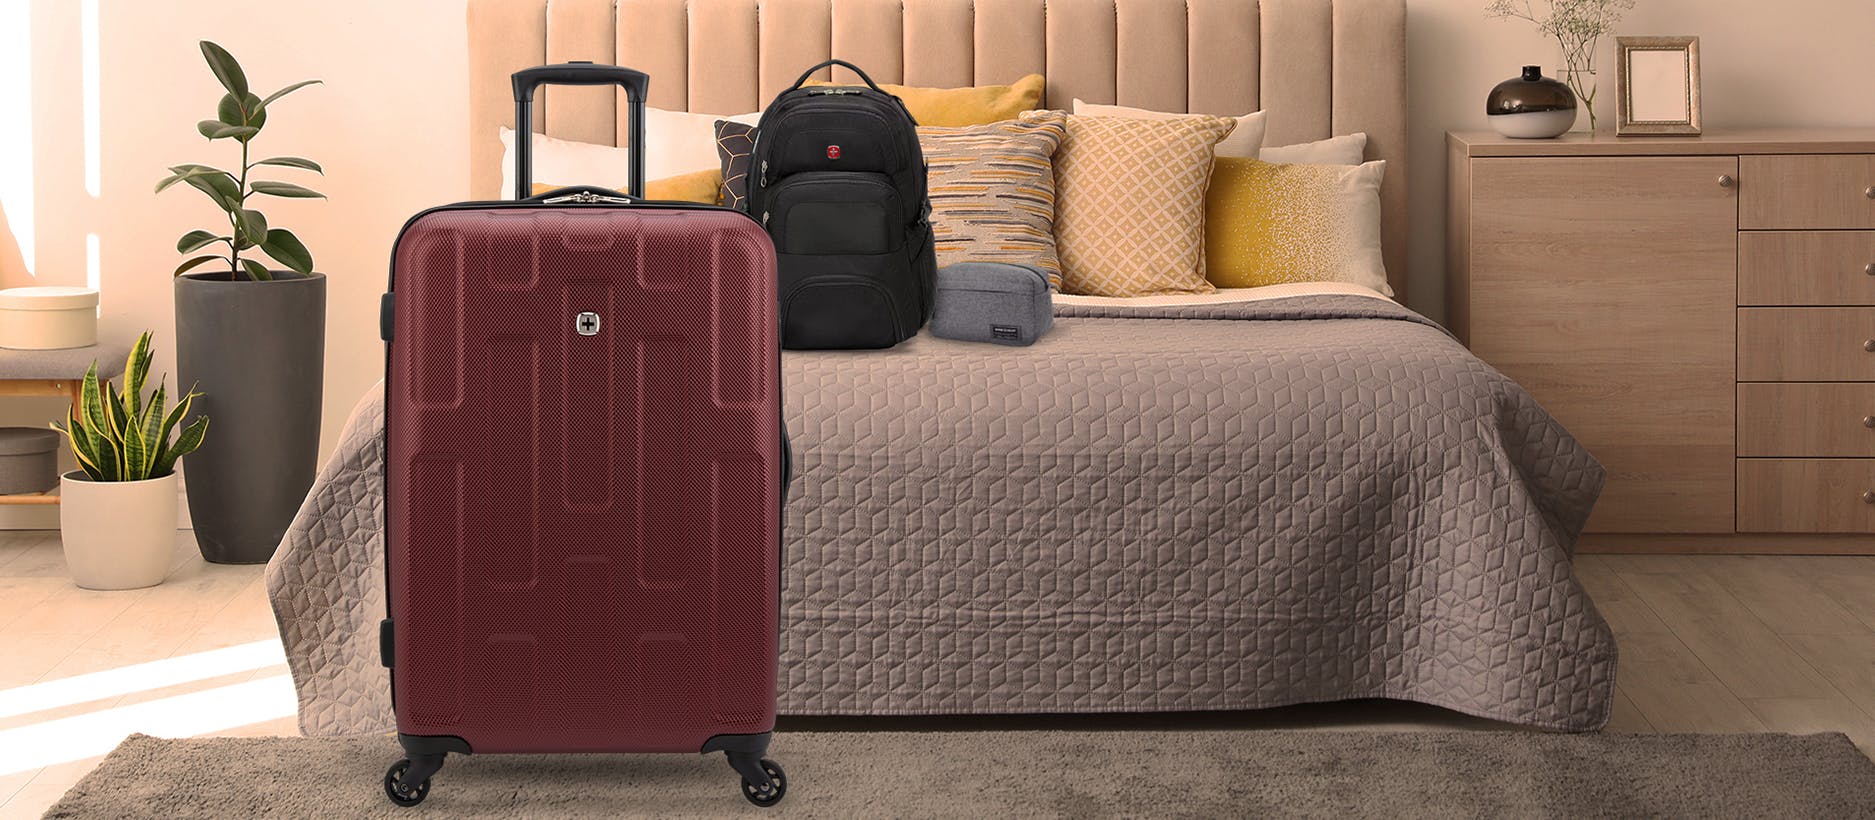 SAVE 20% ON LUGGAGE SETS + FREE GIFT